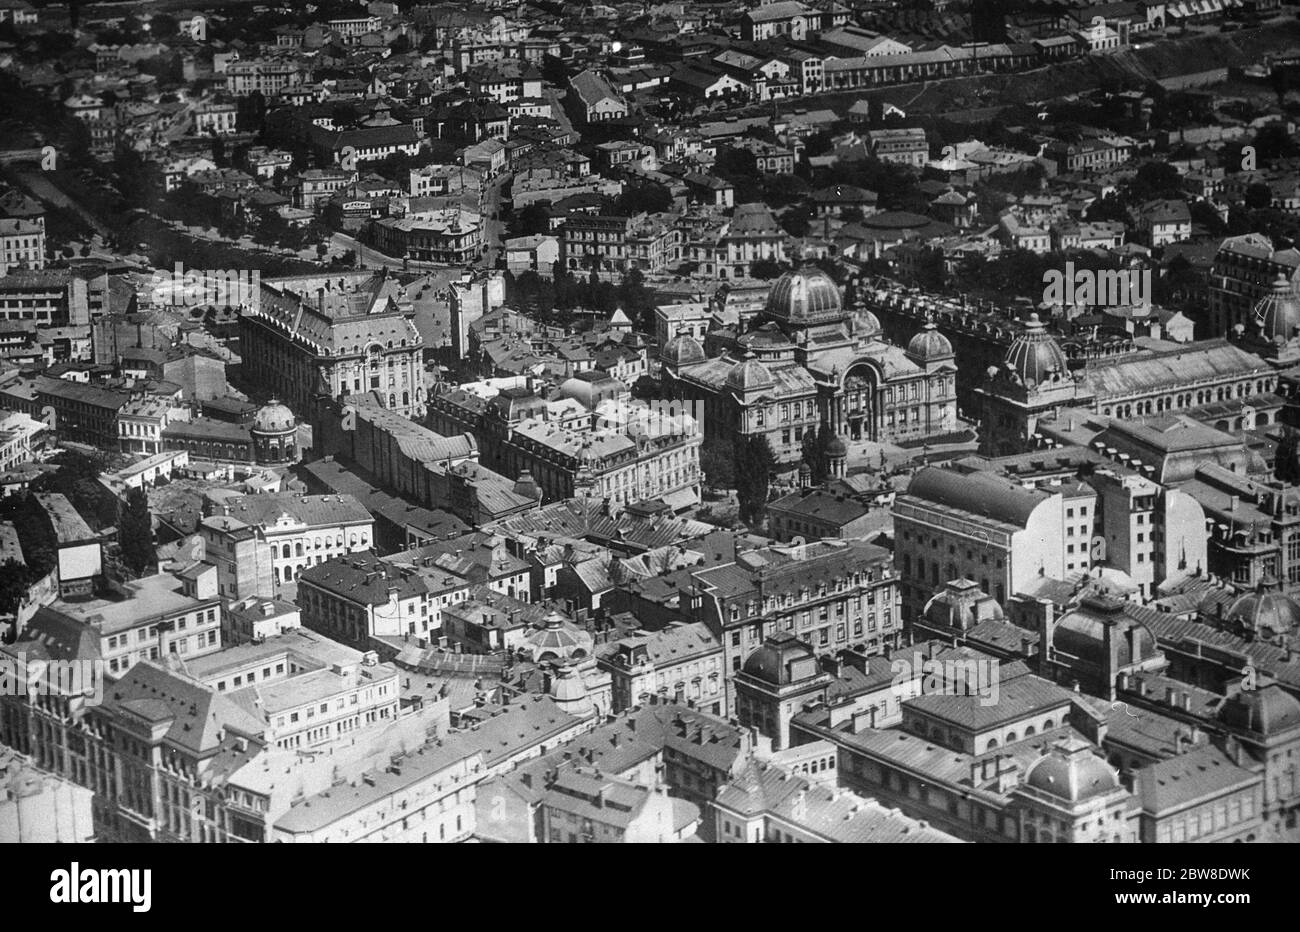 Romania , Bucharest . An aerial view showing the section of the city between the central post office ( left ) and the river Dambovitsa . The large building with the dome , opposite the Post Office , is the National Savings bank . 21 February 1929 Stock Photo